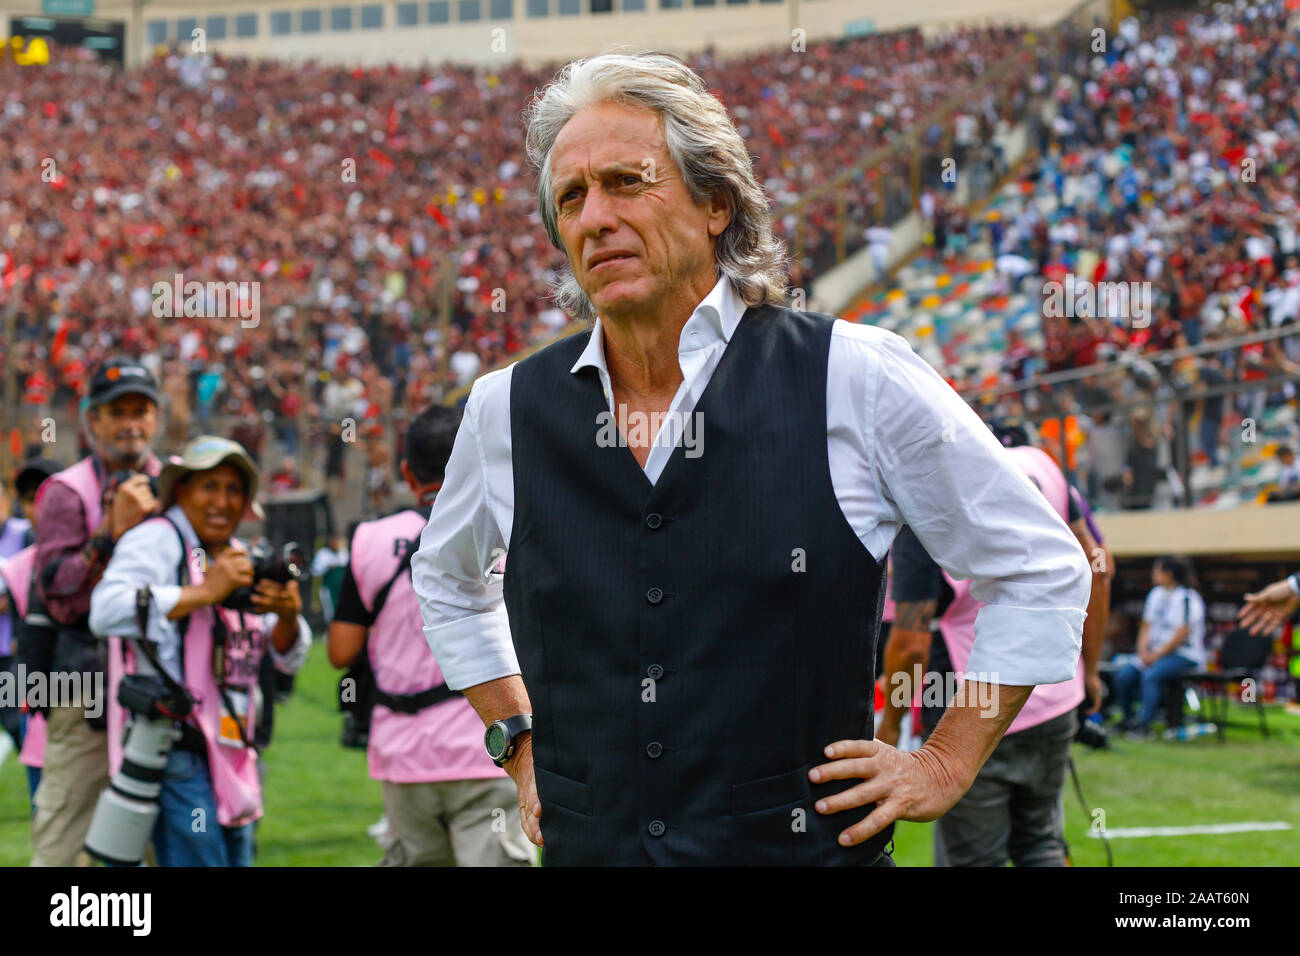 Lima, Peru. 23rd Nov, 2019. xxxx during the 2019 Copa Libertadores Final between Flamengo of Brazil and River Plate of Argentina at Estadio Monumental 'U'  in Lima, Peru on 23 Nov 2019. Credit: SPP Sport Press Photo. /Alamy Live News Stock Photo